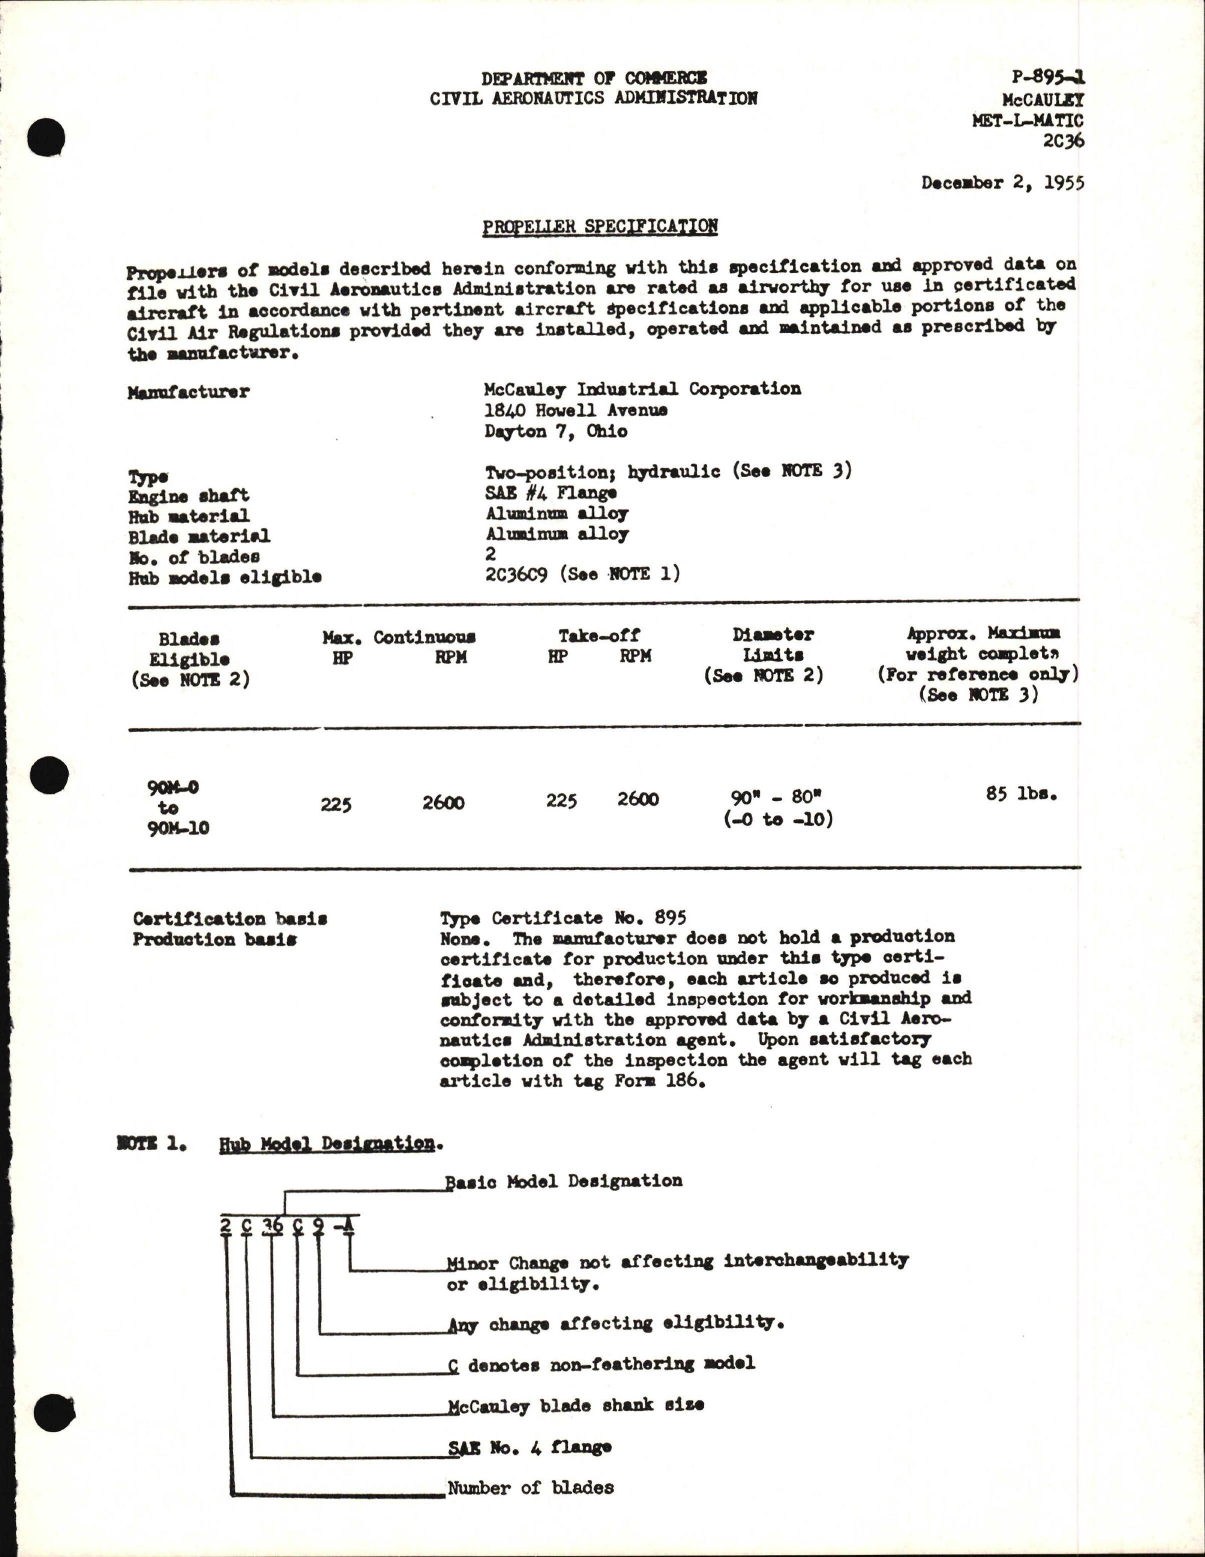 Sample page 1 from AirCorps Library document: 2C36 MET-L-MATIC